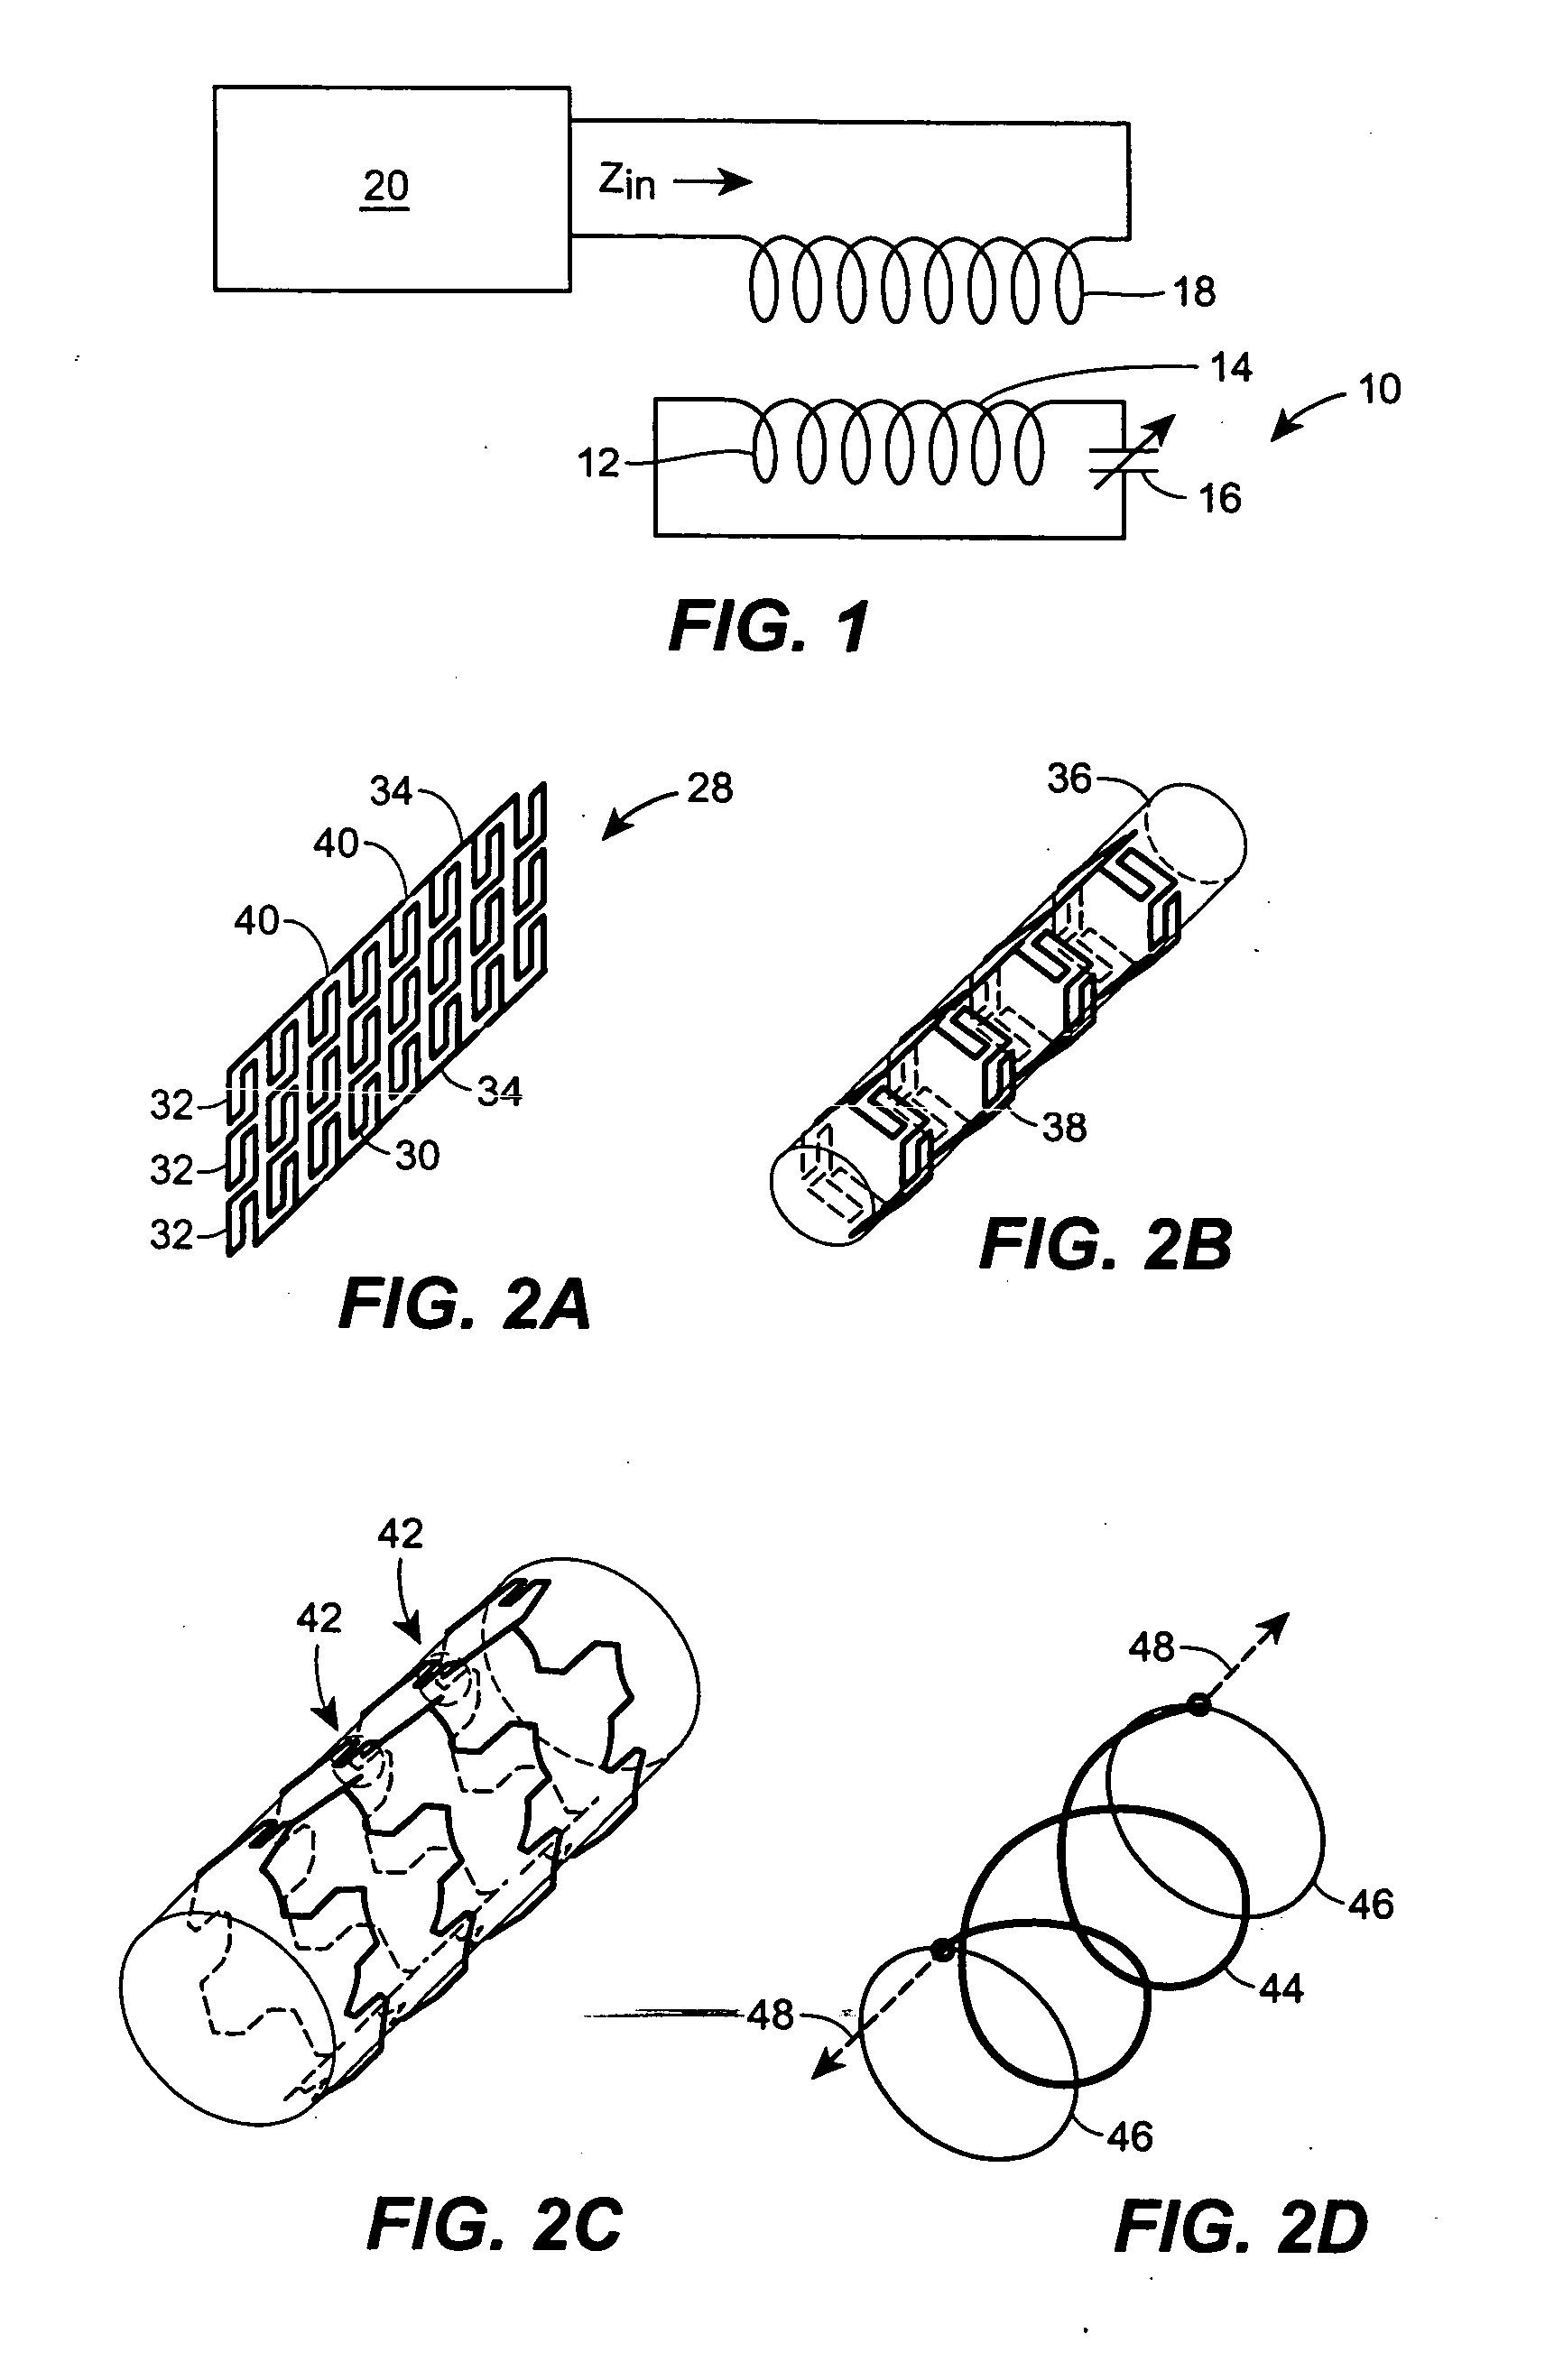 Antenna stent device for wireless, intraluminal monitoring